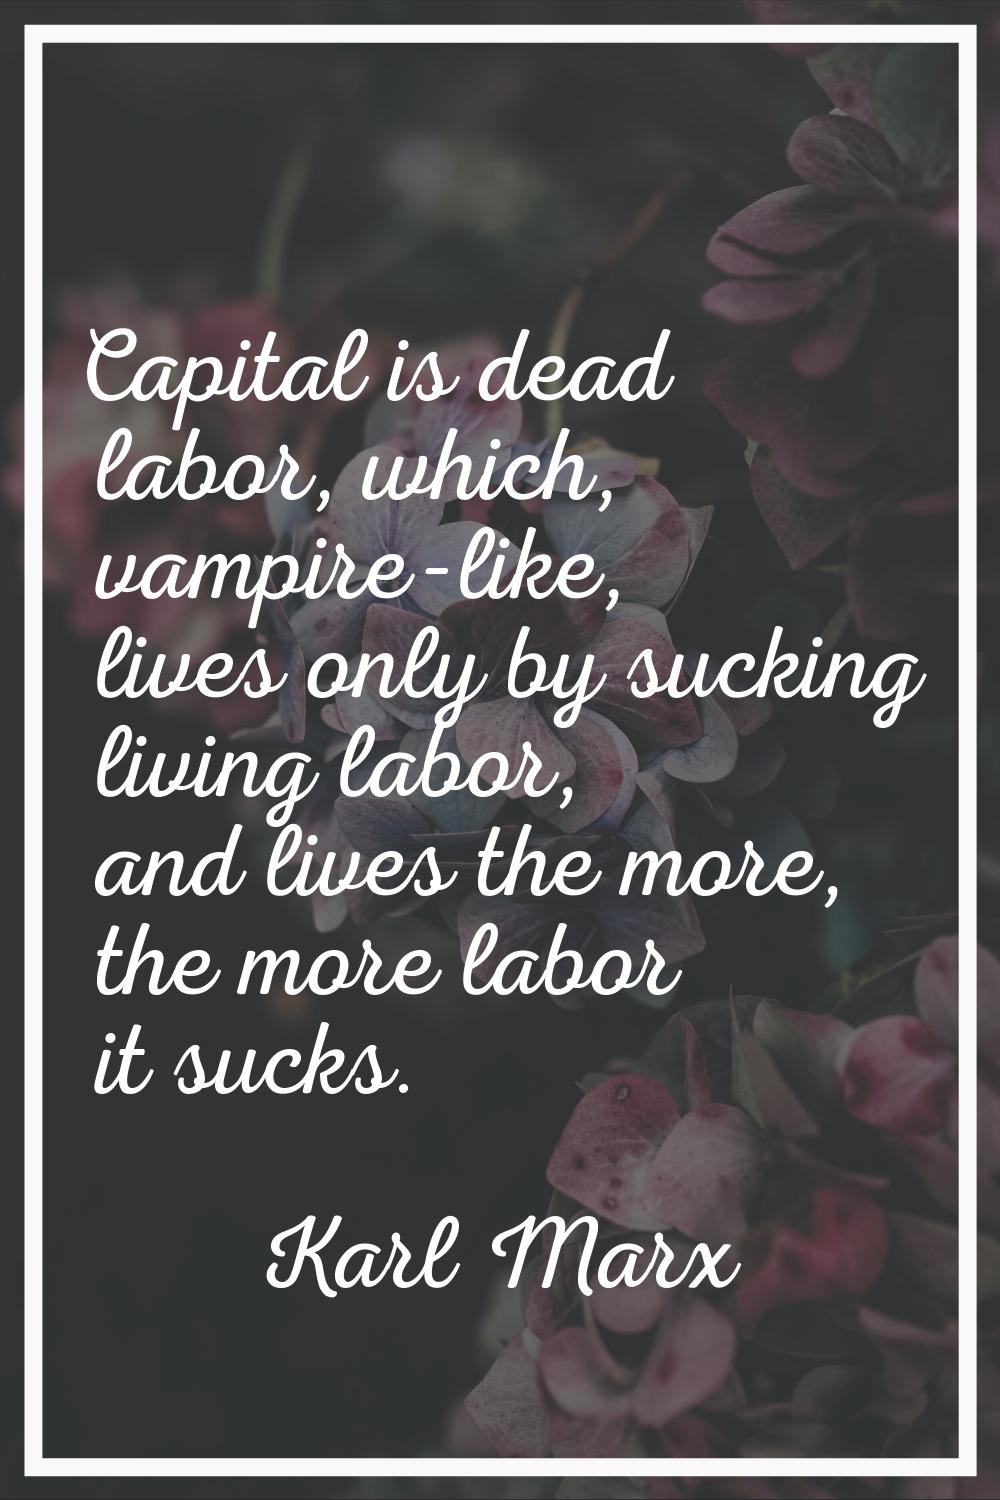 Capital is dead labor, which, vampire-like, lives only by sucking living labor, and lives the more,